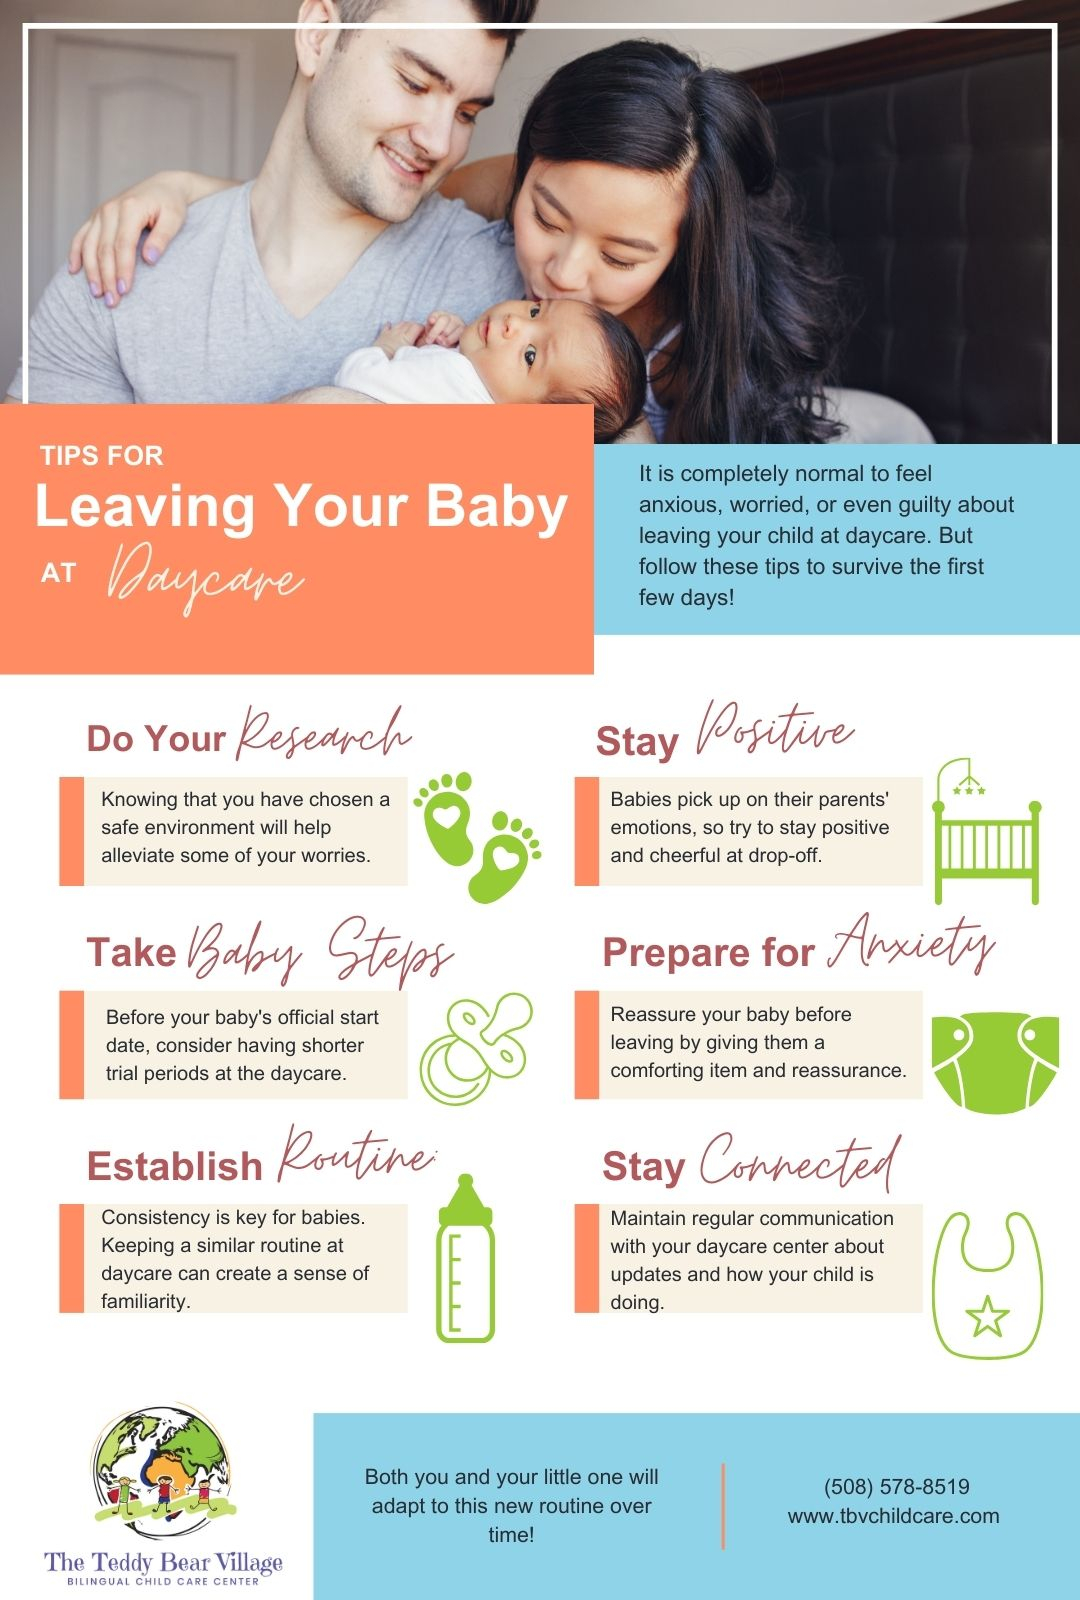 M38274 - Jan 2024 Infographic - Tips for Leaving Your Baby At Daycare.jpg